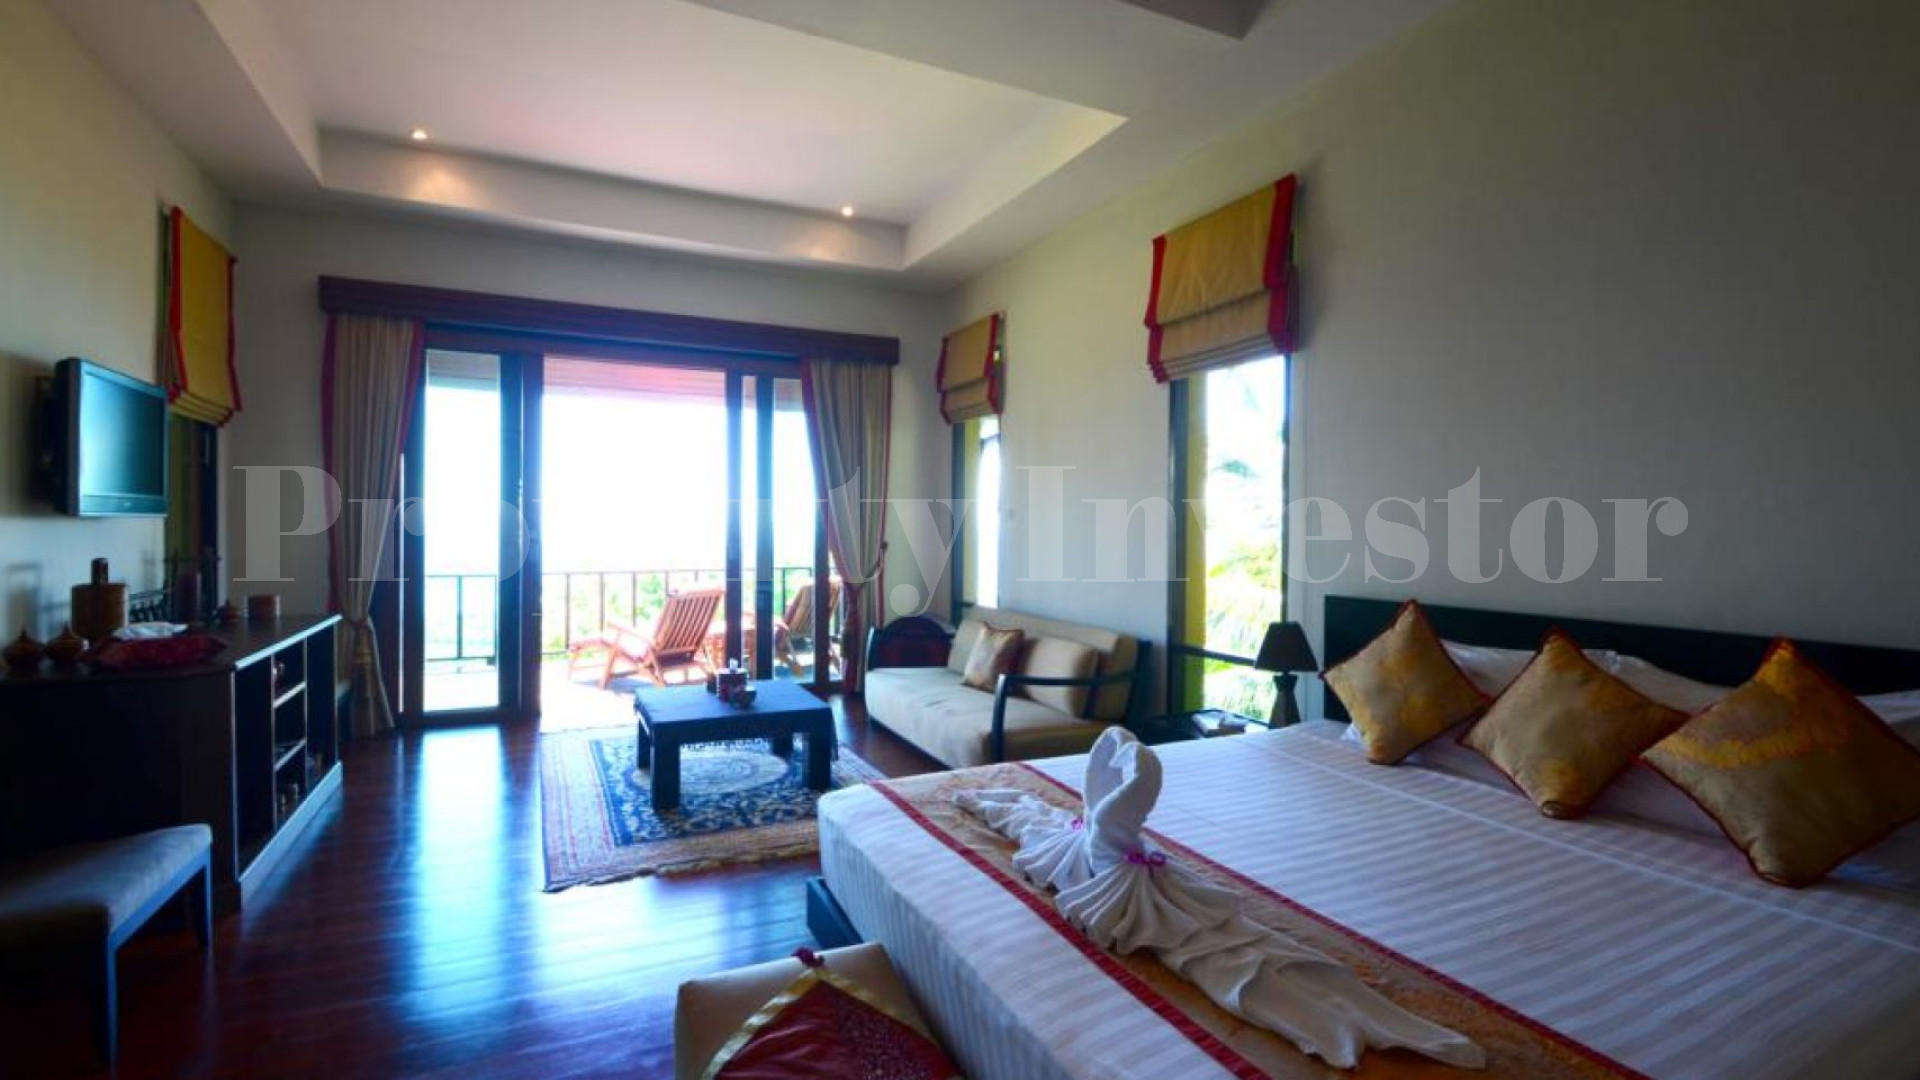 Stunning 6 Bedroom  Luxury Hillside Villa with Amazing Panoramic Views for Sale in Koh Samui, Thailand